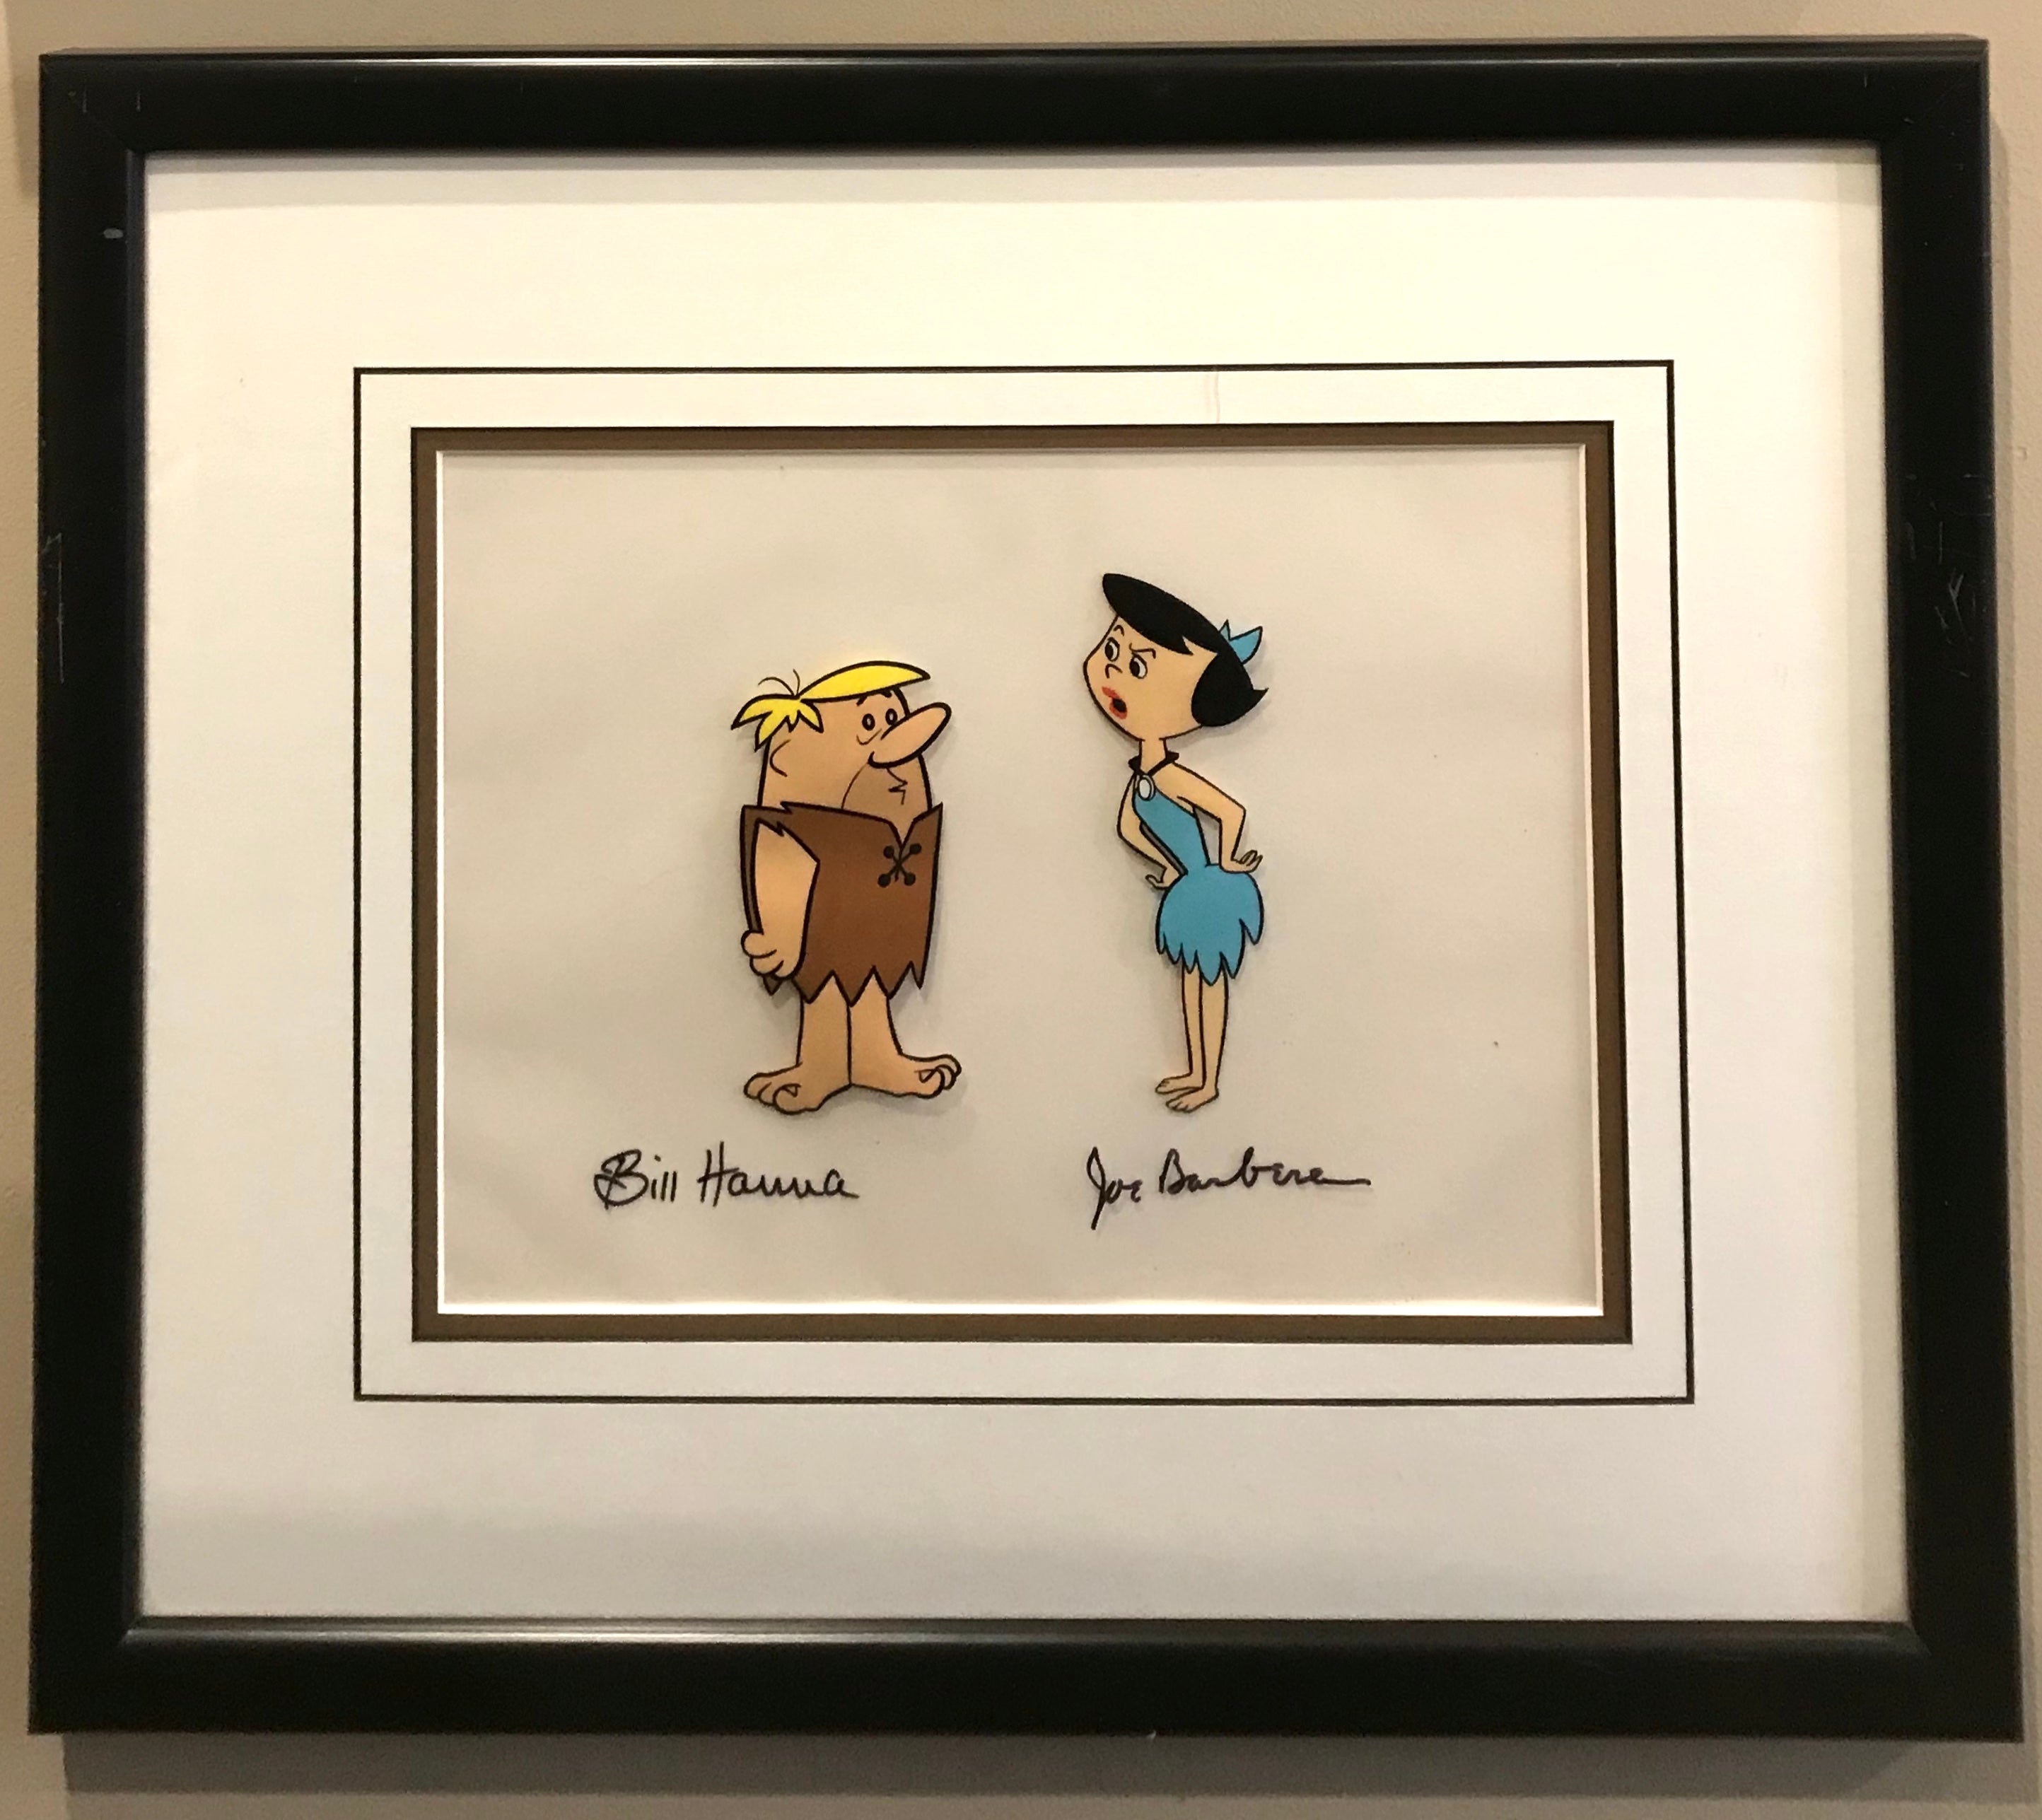 Hanna Barbera Production Cel From The Flintstones Social Climbers Featuring Barney Rubble And 9317